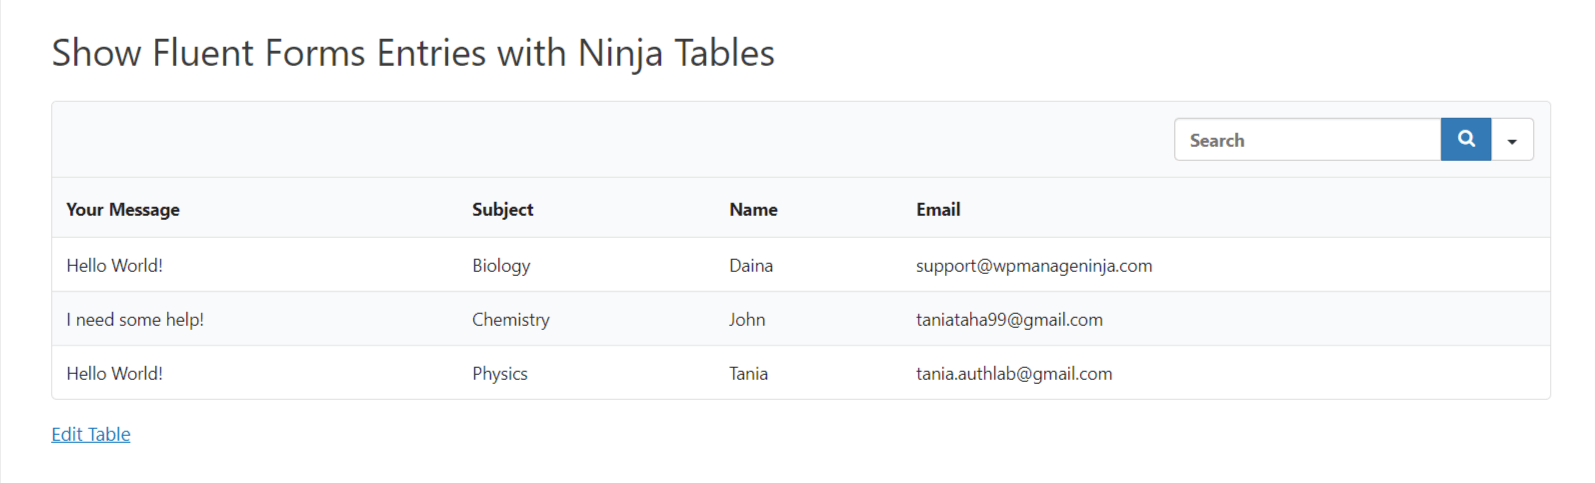 Ninja Forms Frontend Submission Demo #1 - Testify